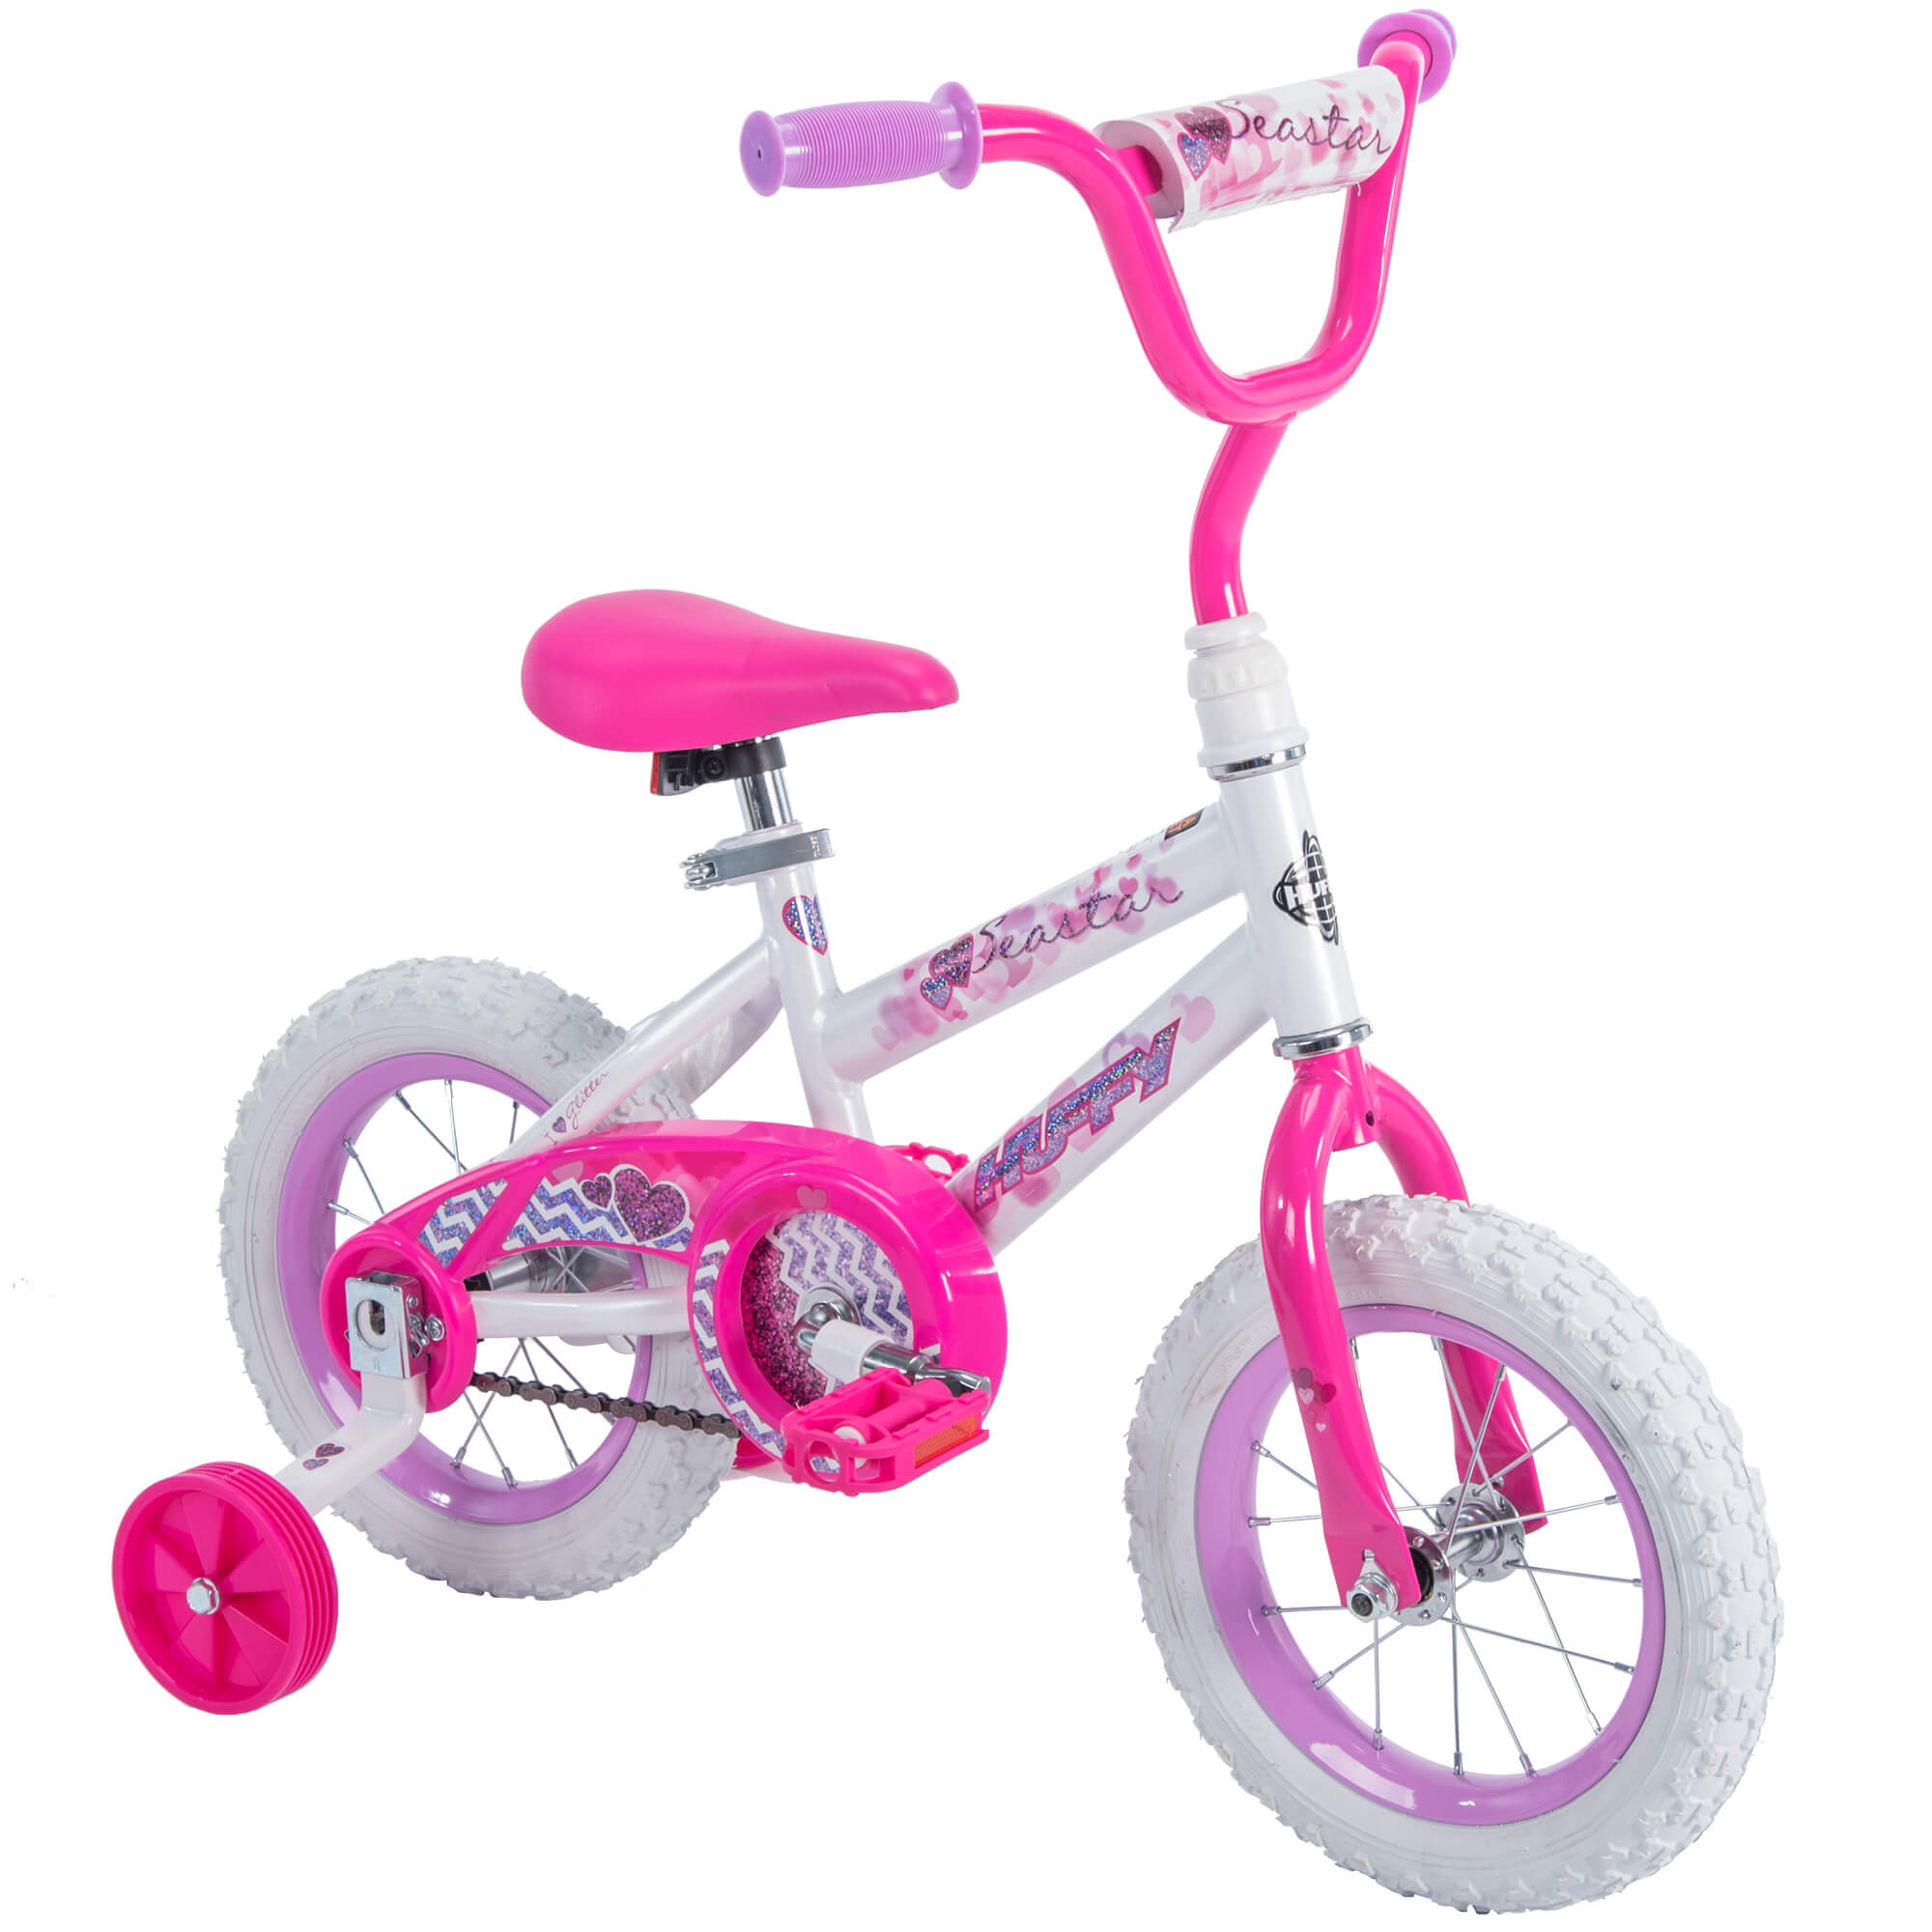 Huffy 12 in. Sea Star Kids Bike for Girls Ages 3 and up Years, Child, White - image 2 of 10